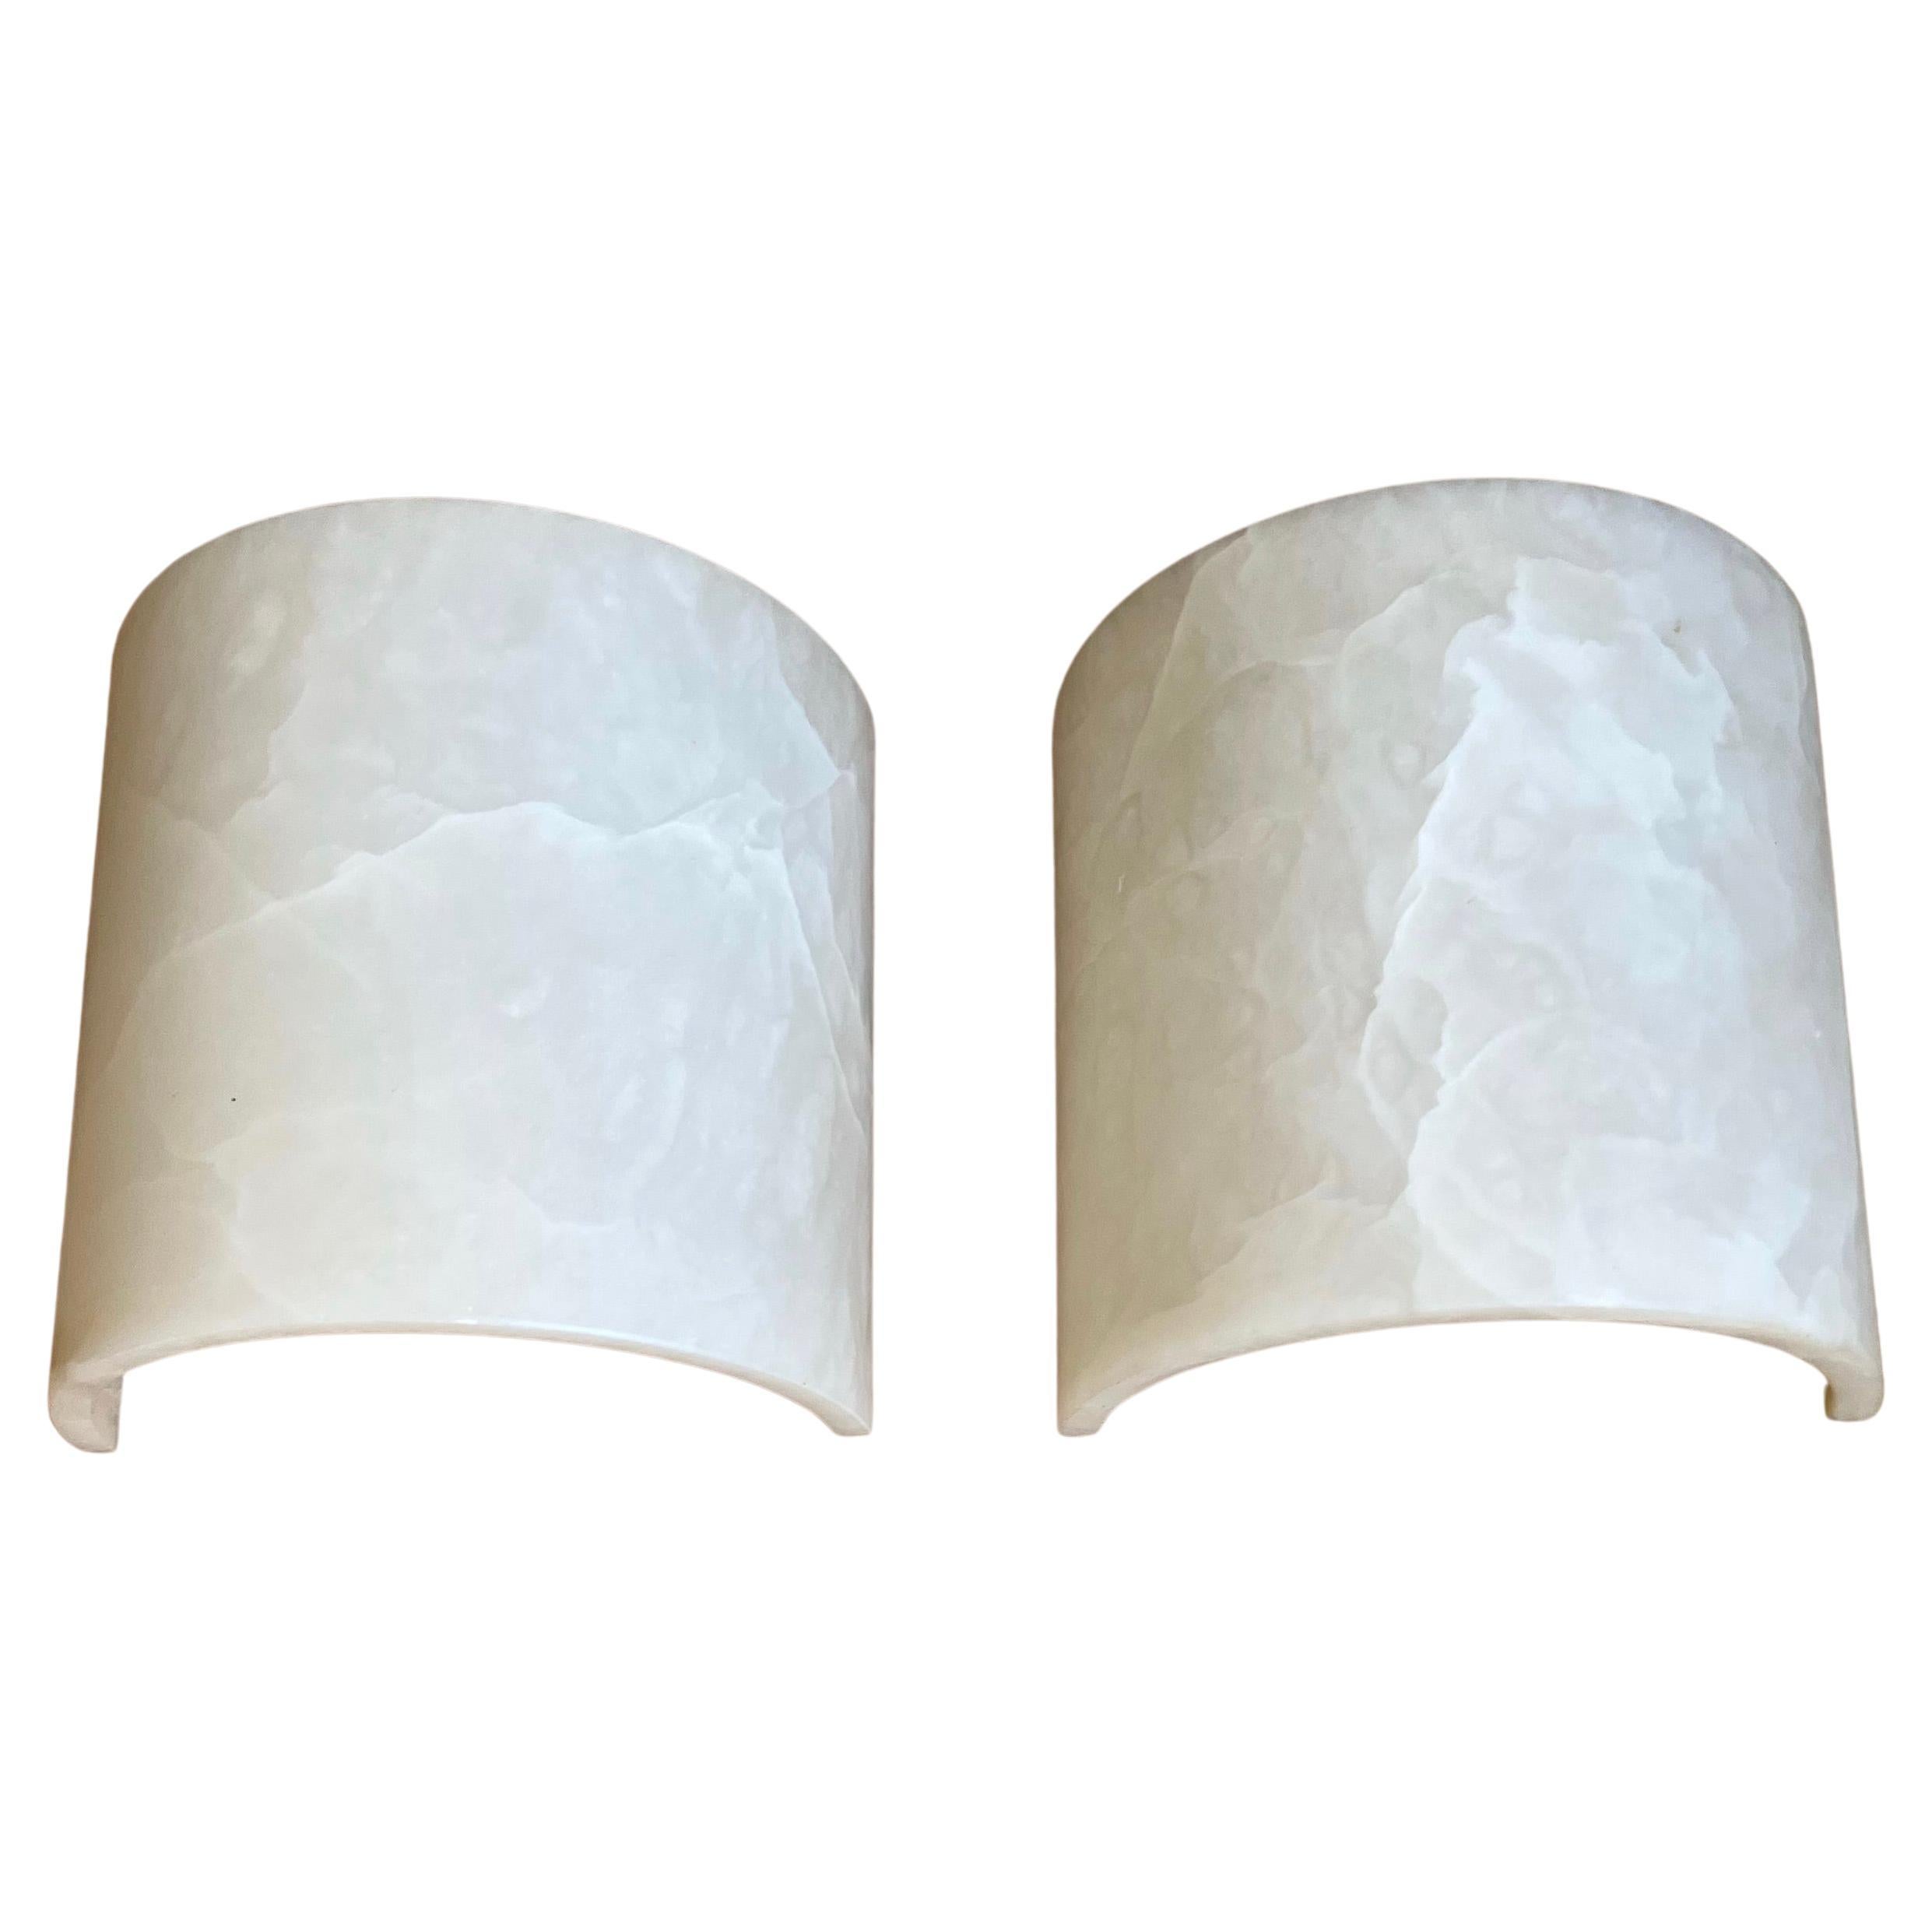 Great Pair of Art Deco Style Alabaster Up & Down Light Wall Sconces / Fixtures